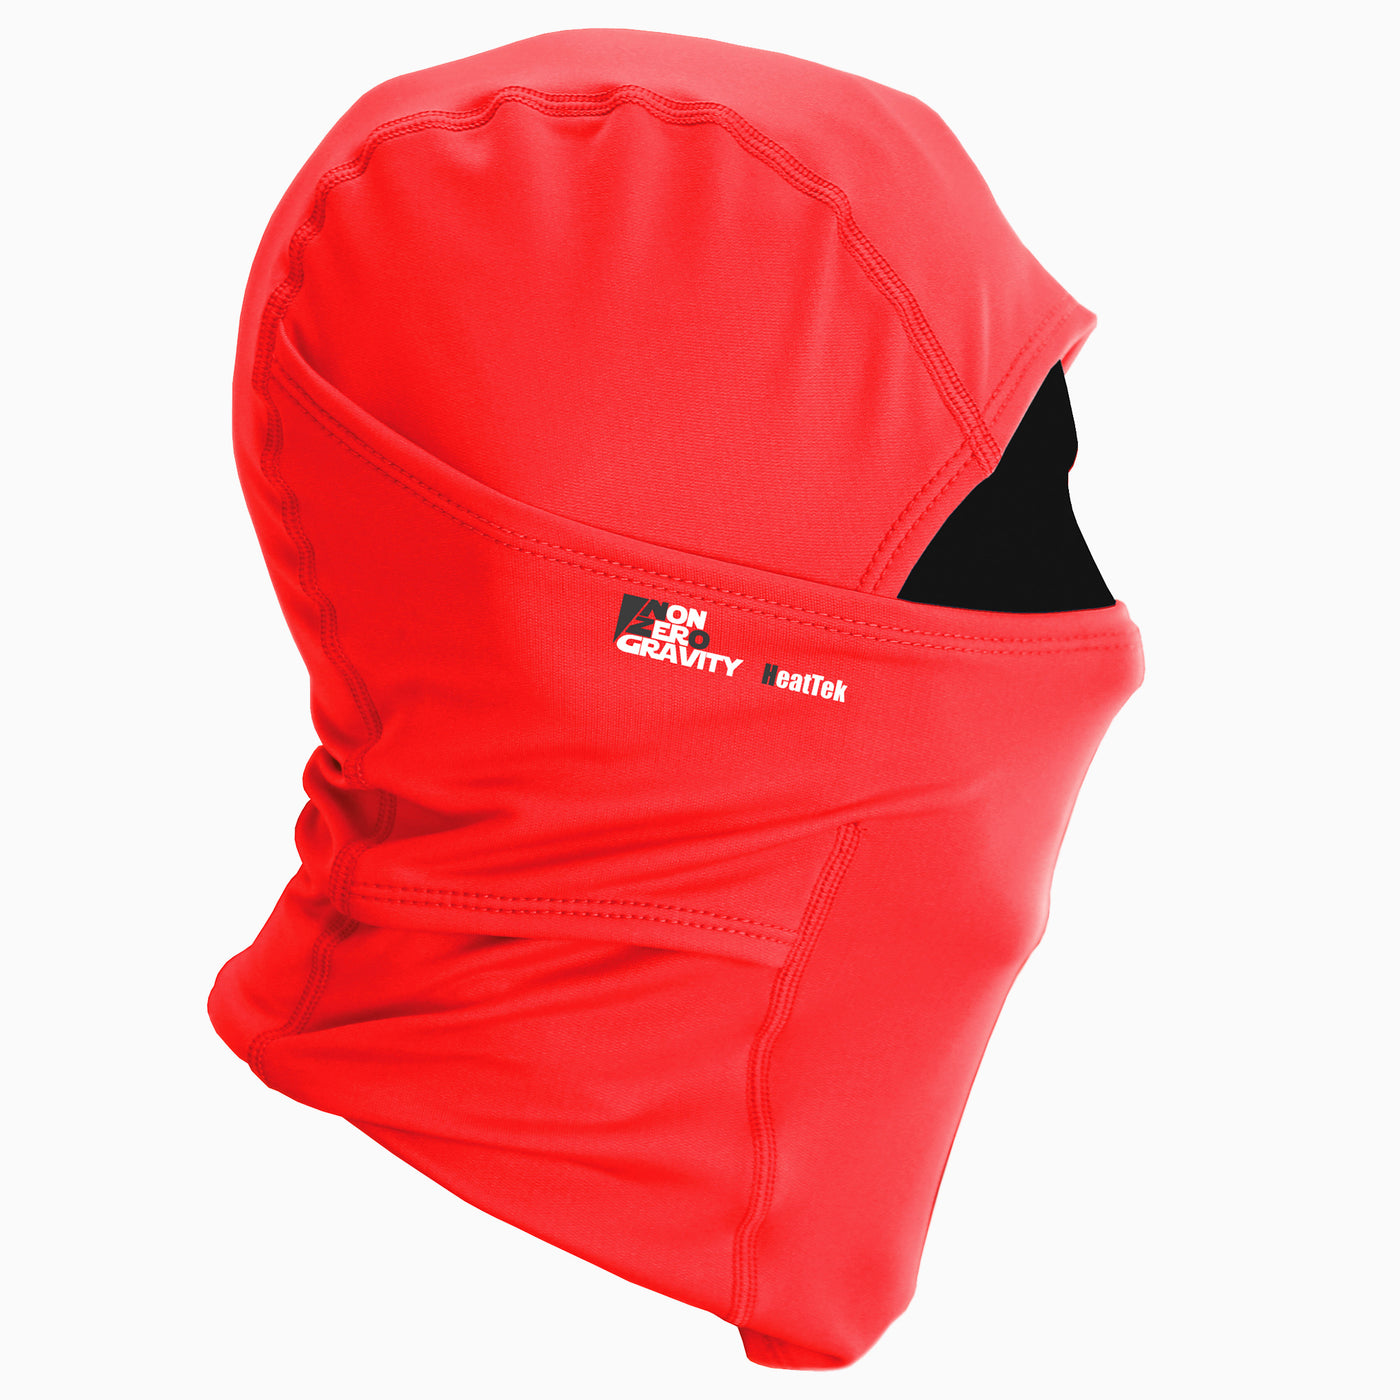 a red spandex athletic balaclava to mask and protect your face